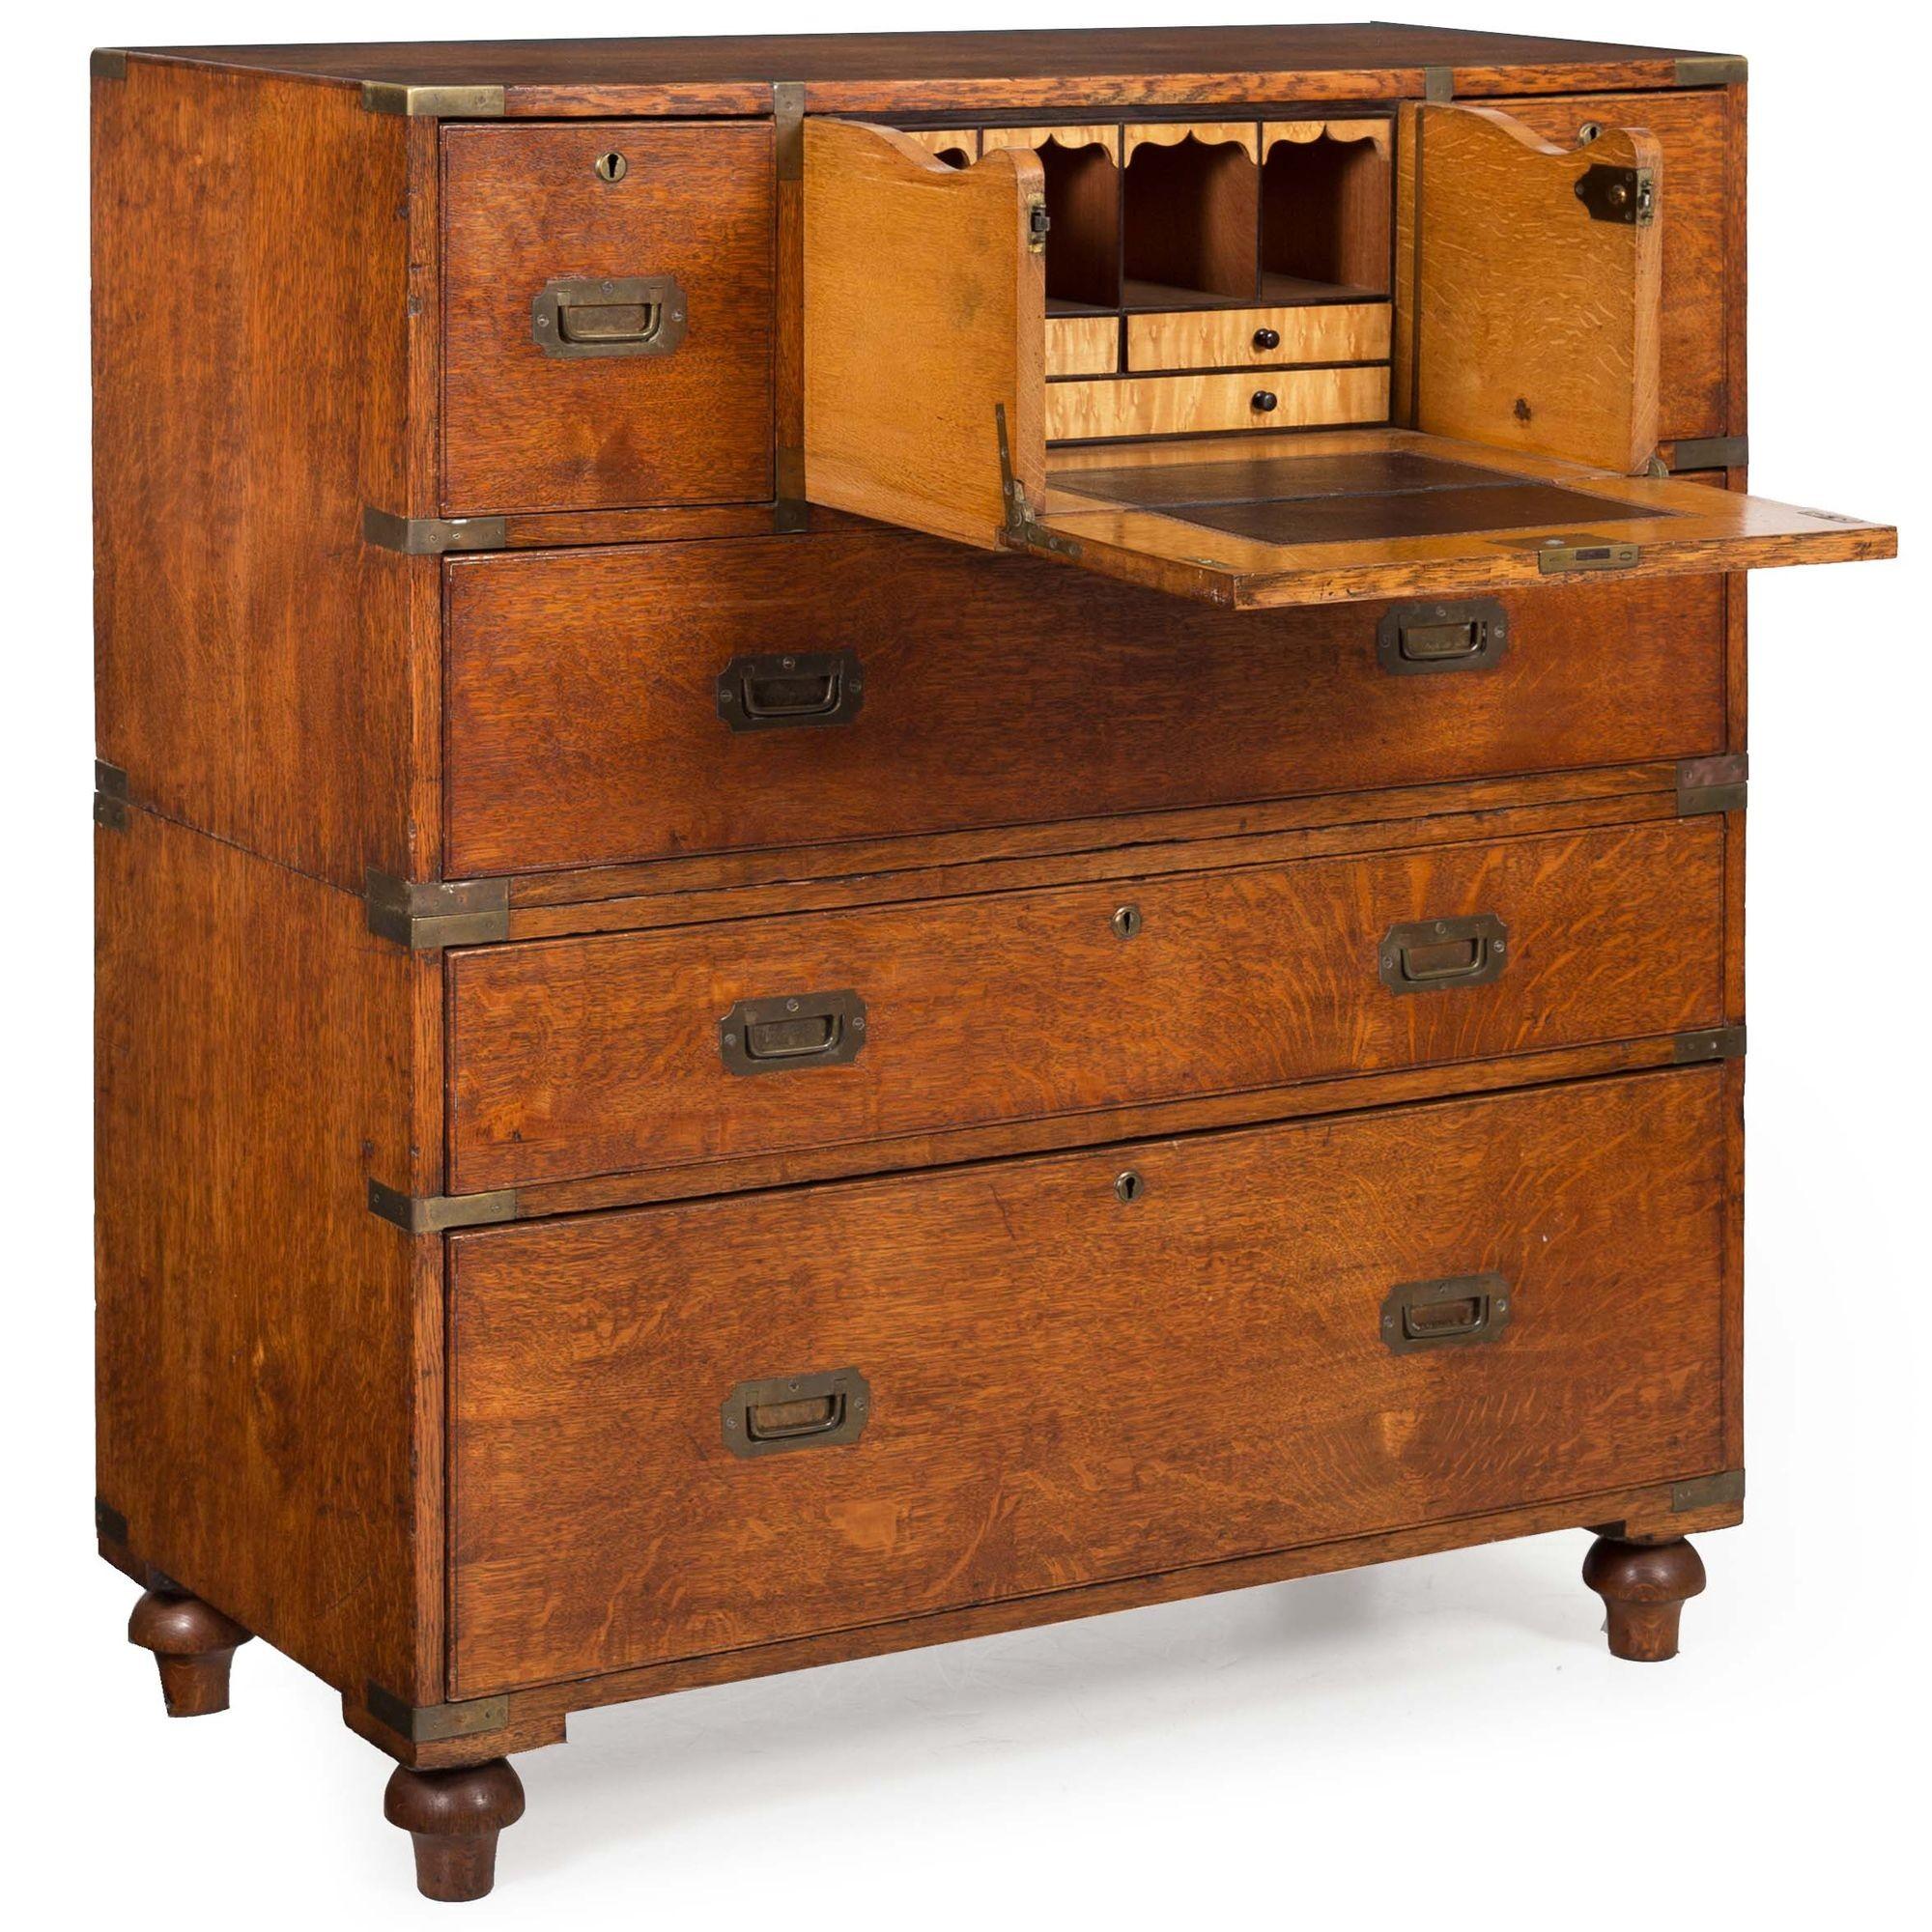 An exquisite mid-19th century British campaign chest crafted in two self-contained parts with a desk hidden inside of one of the upper drawers, it features a solid golden-oak primary wood with a silky patina throughout. Entirely pure with only a few